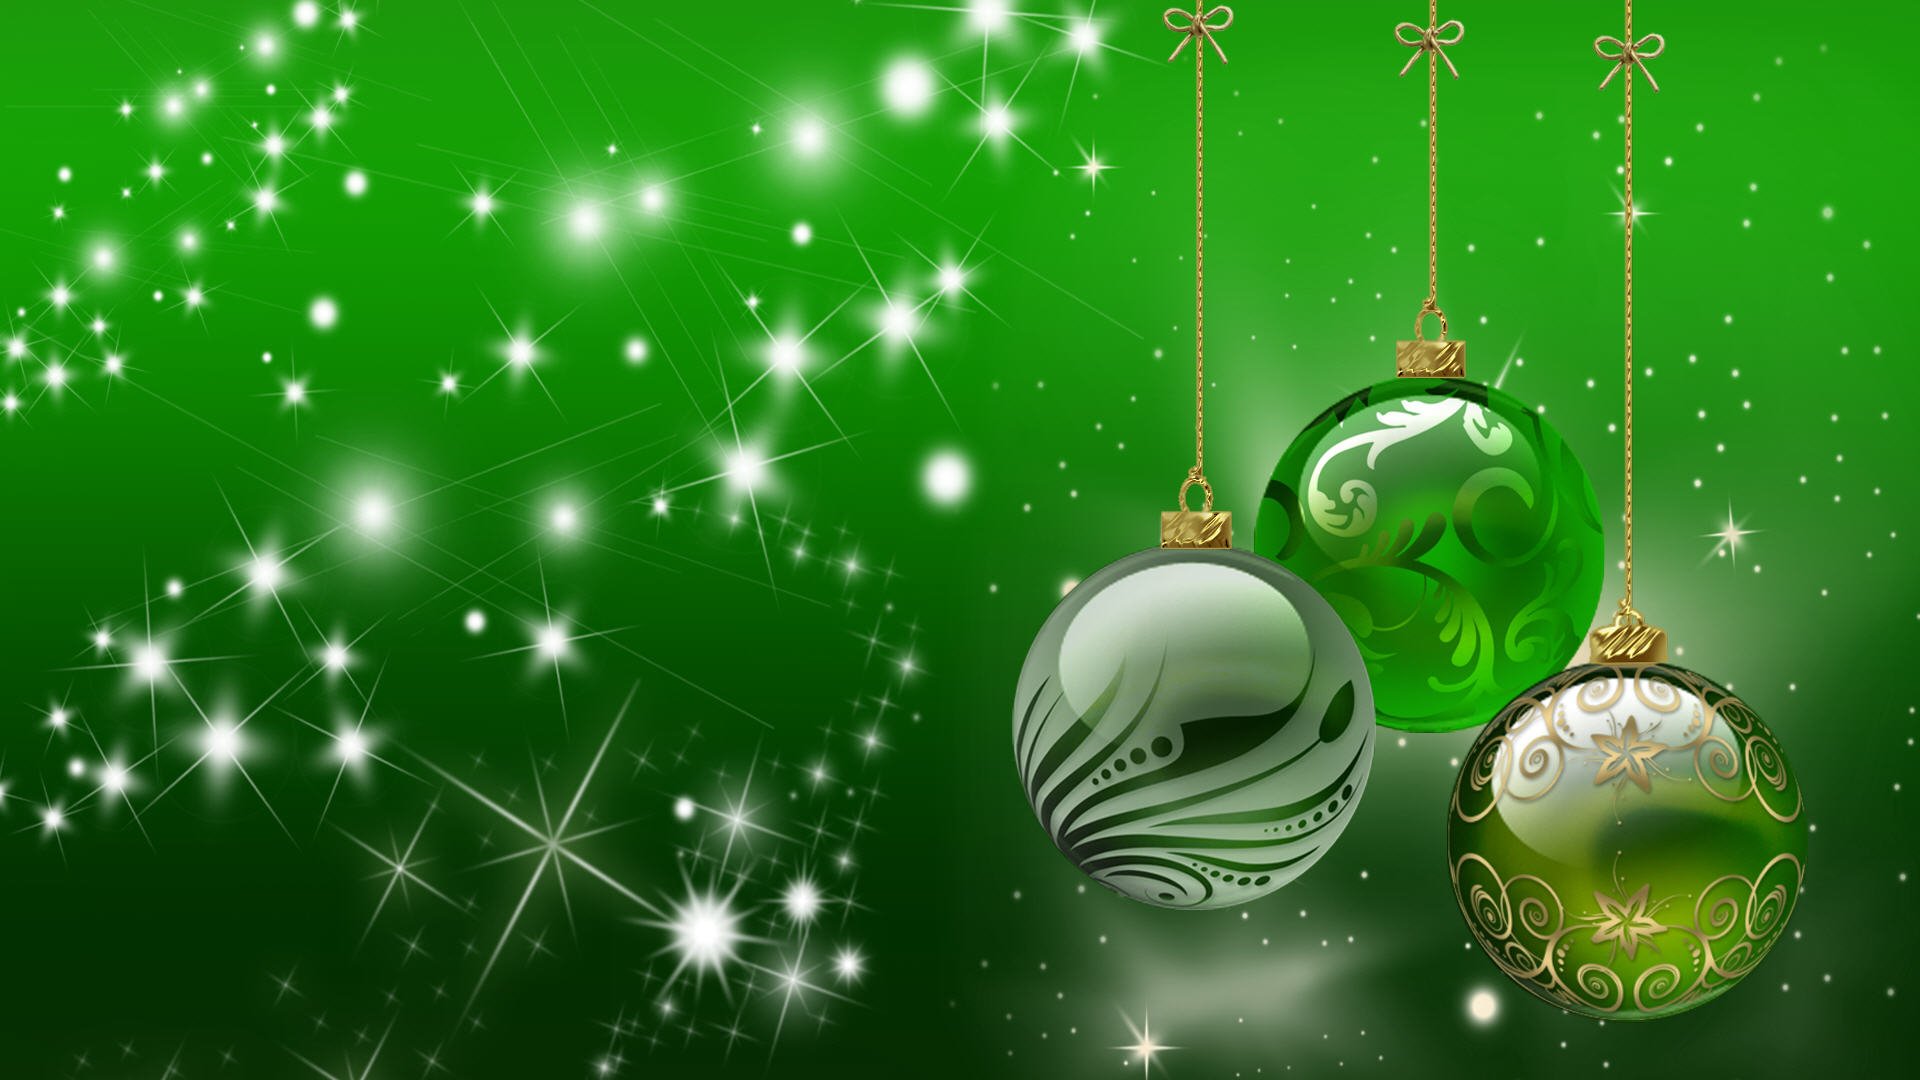 Holiday Image Free Download   Christmas Green Background Hd